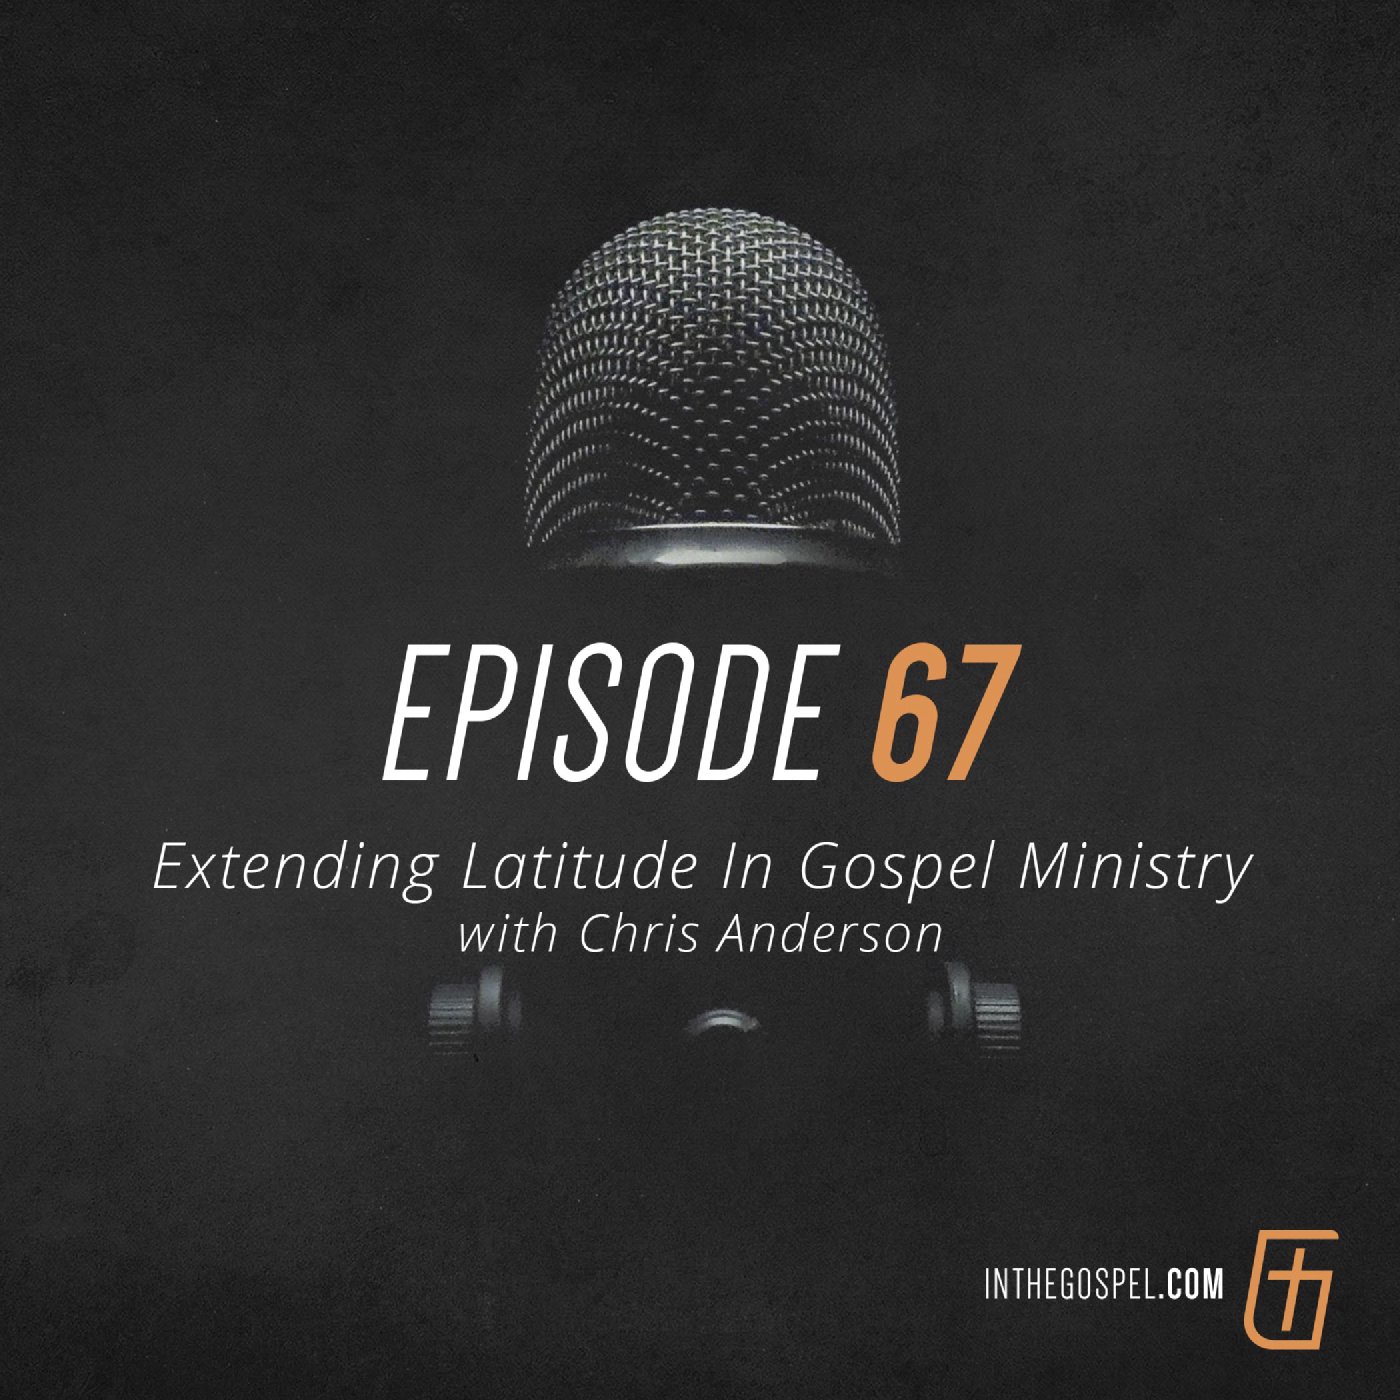 Episode 67: Extending Latitude In Gospel Ministry with Chris Anderson